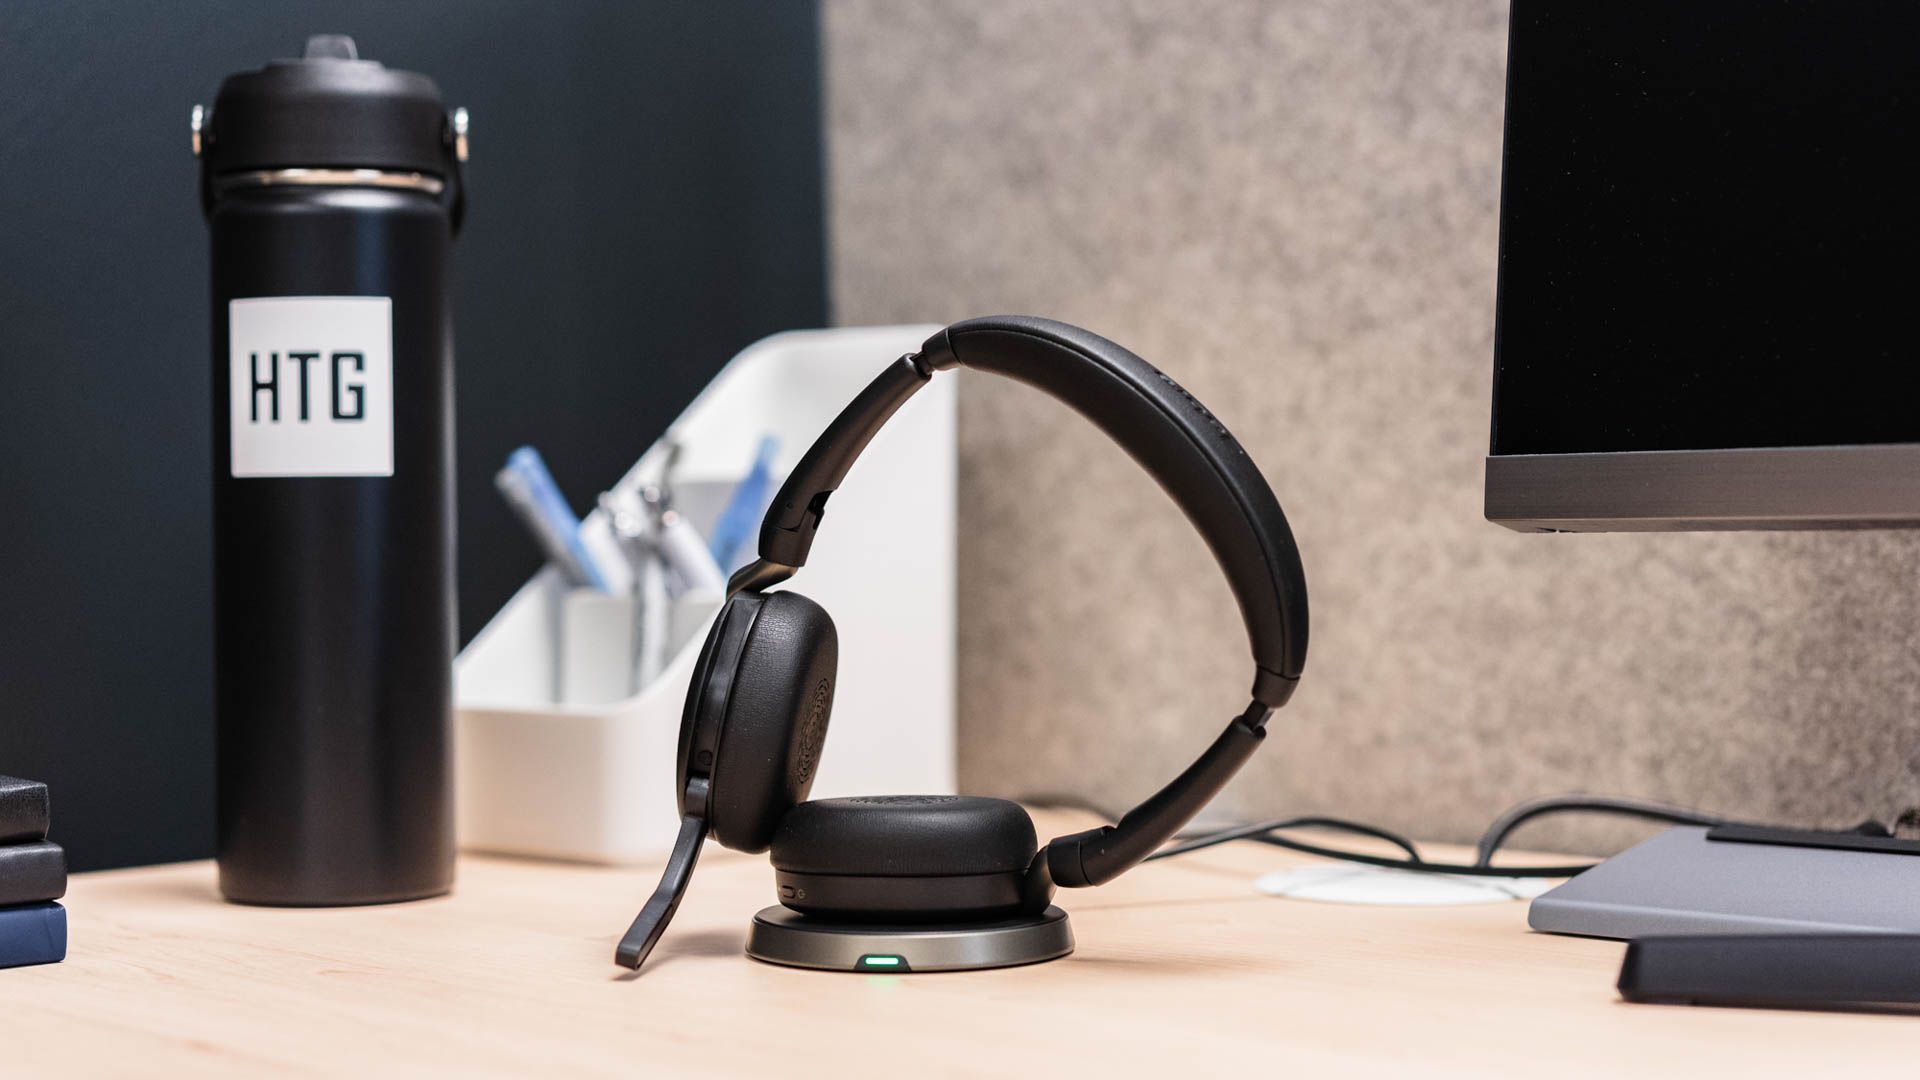 Jabra Evolve2 65 Flex review: Luxurious foldable headset - Can Buy